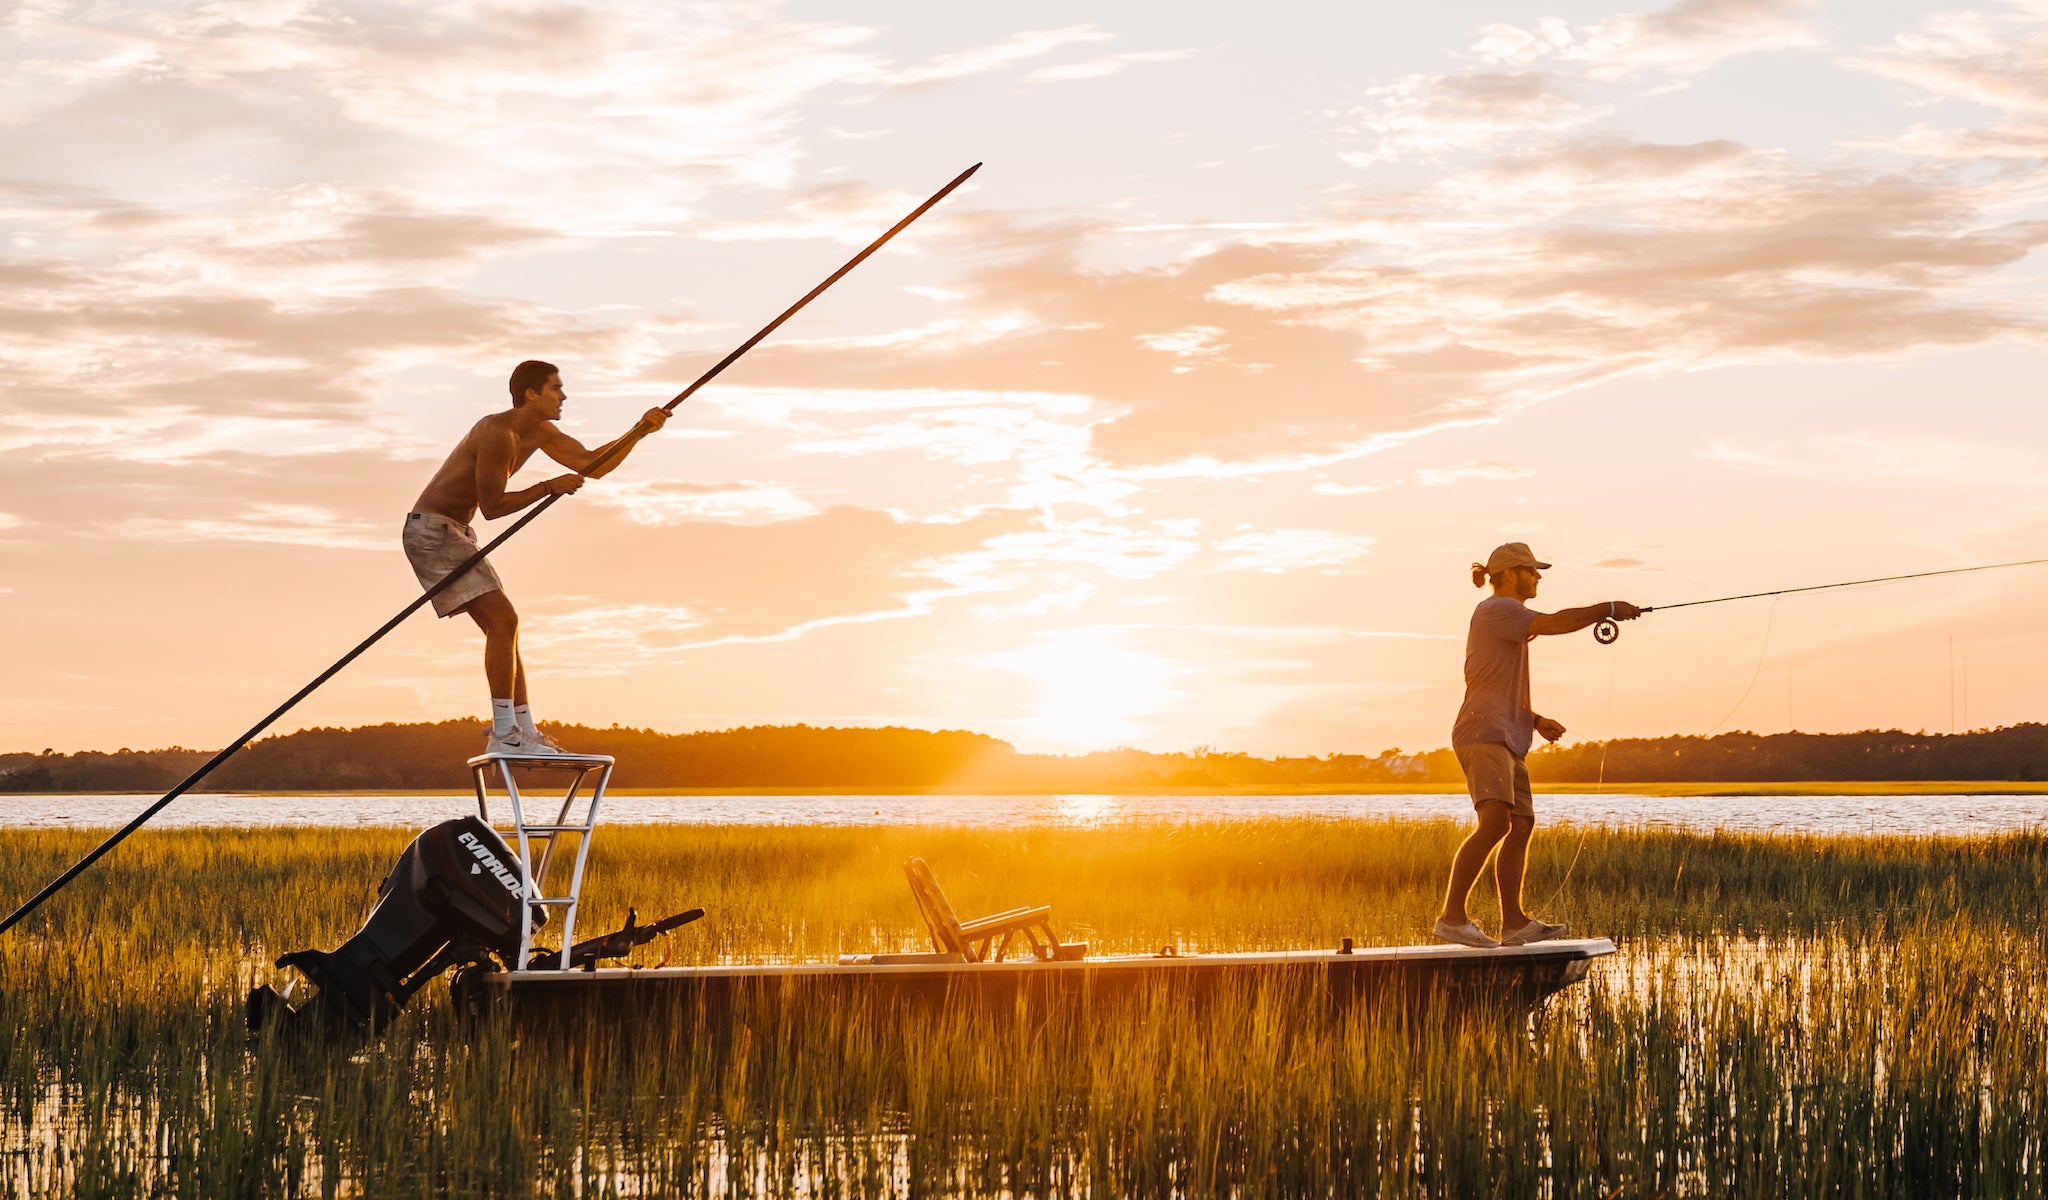 Two Men Fishing on a boat in the marshlands of the Carolinas with a Voyager outdoor chair from PARKIT serving as the main seat and center console while they fish